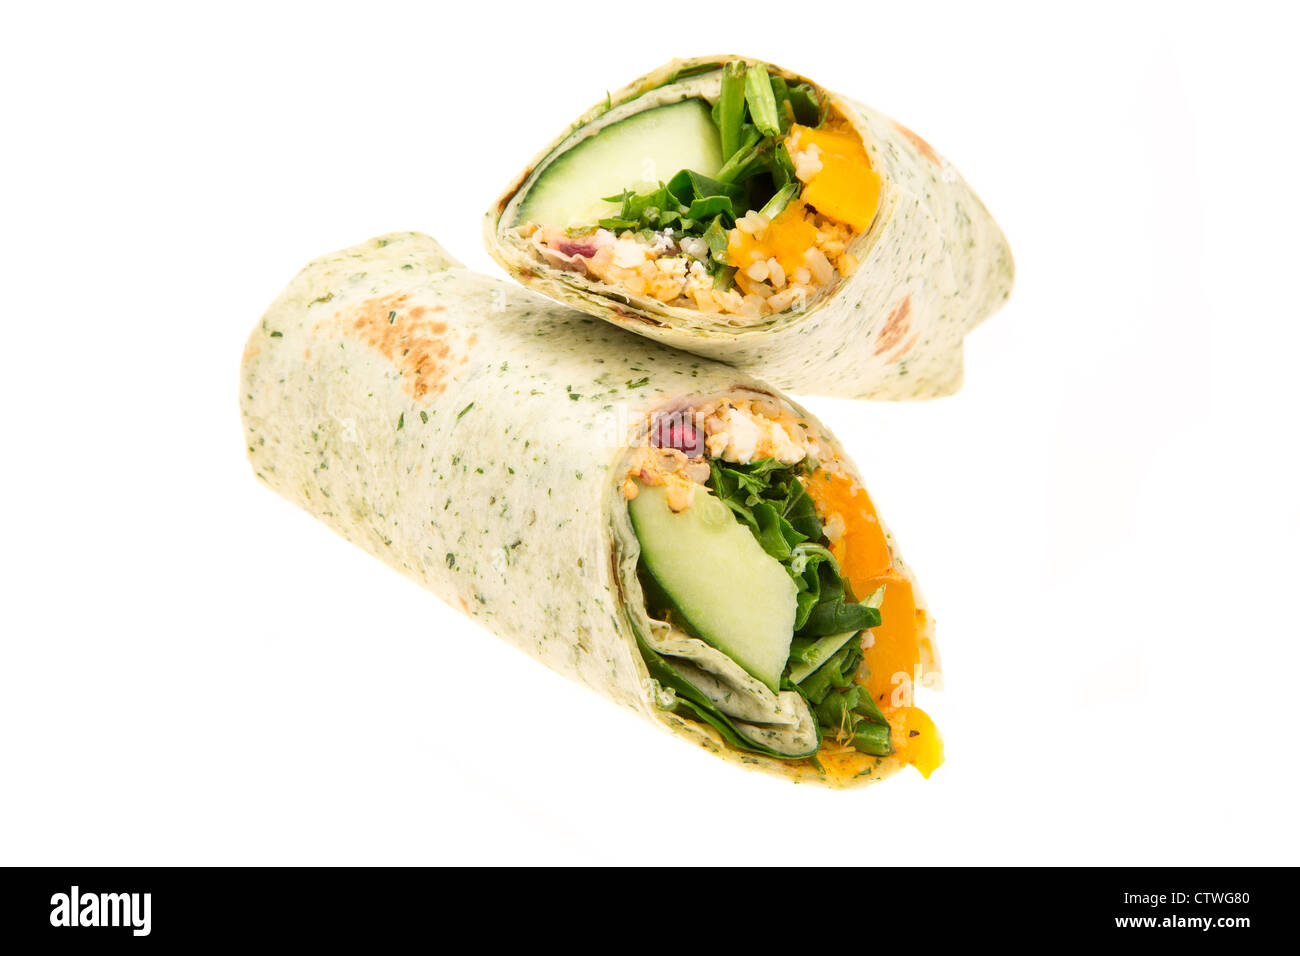 Roasted butternut squash and feta cheese wrap sandwich - studio shot with a white background Stock Photo